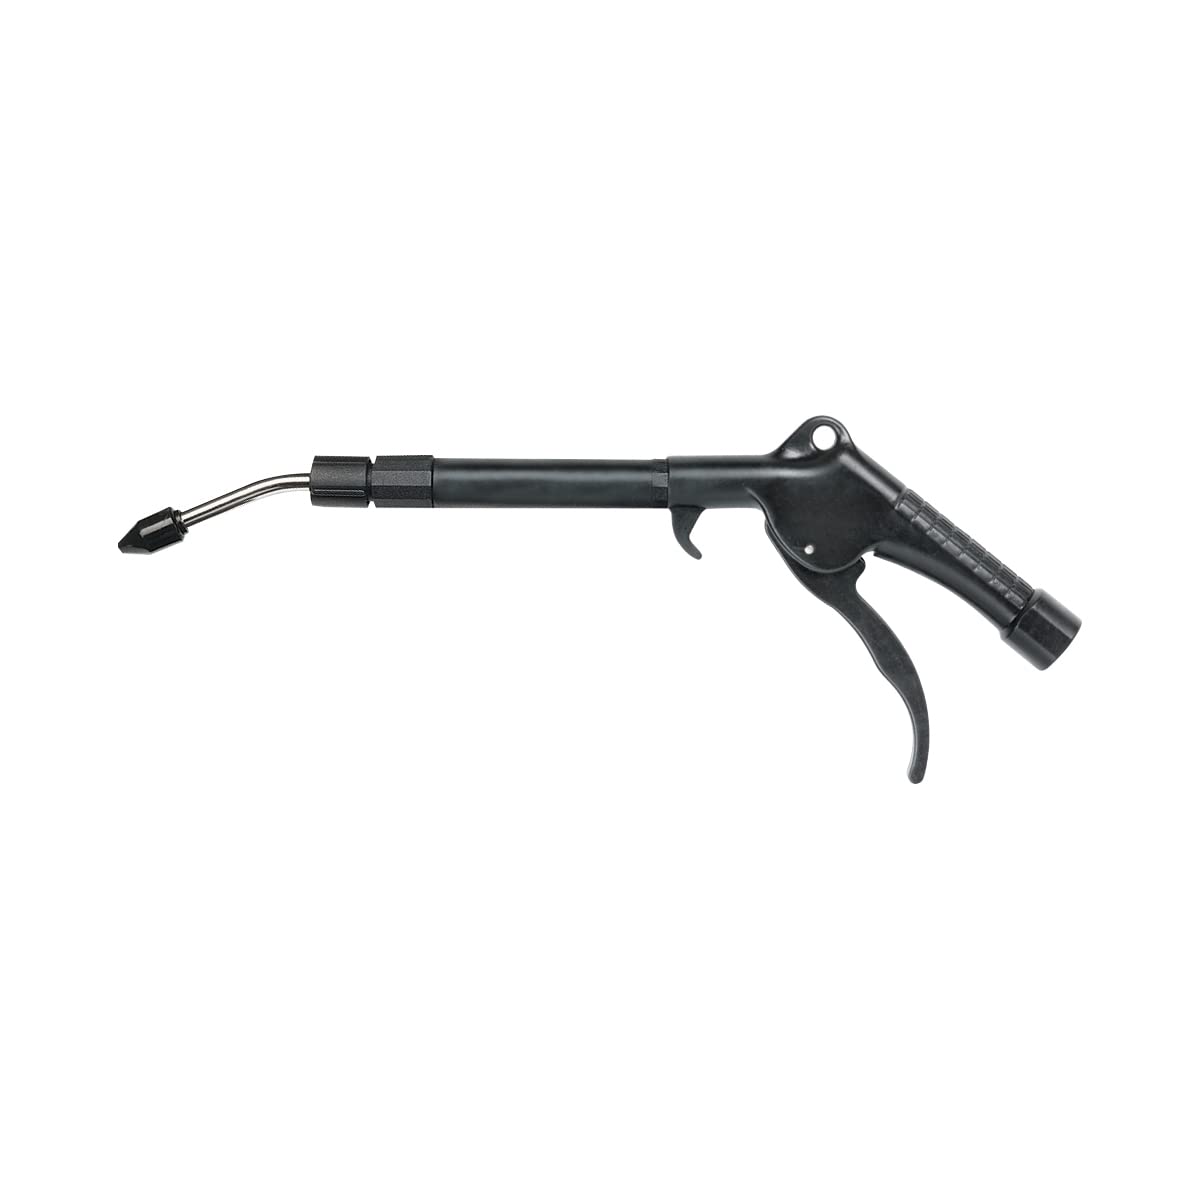 Back Again: Workforce Blow Gun with 360° Rotating, Adjustable Length Extension - AG2-10 $2.22 @ Amazon